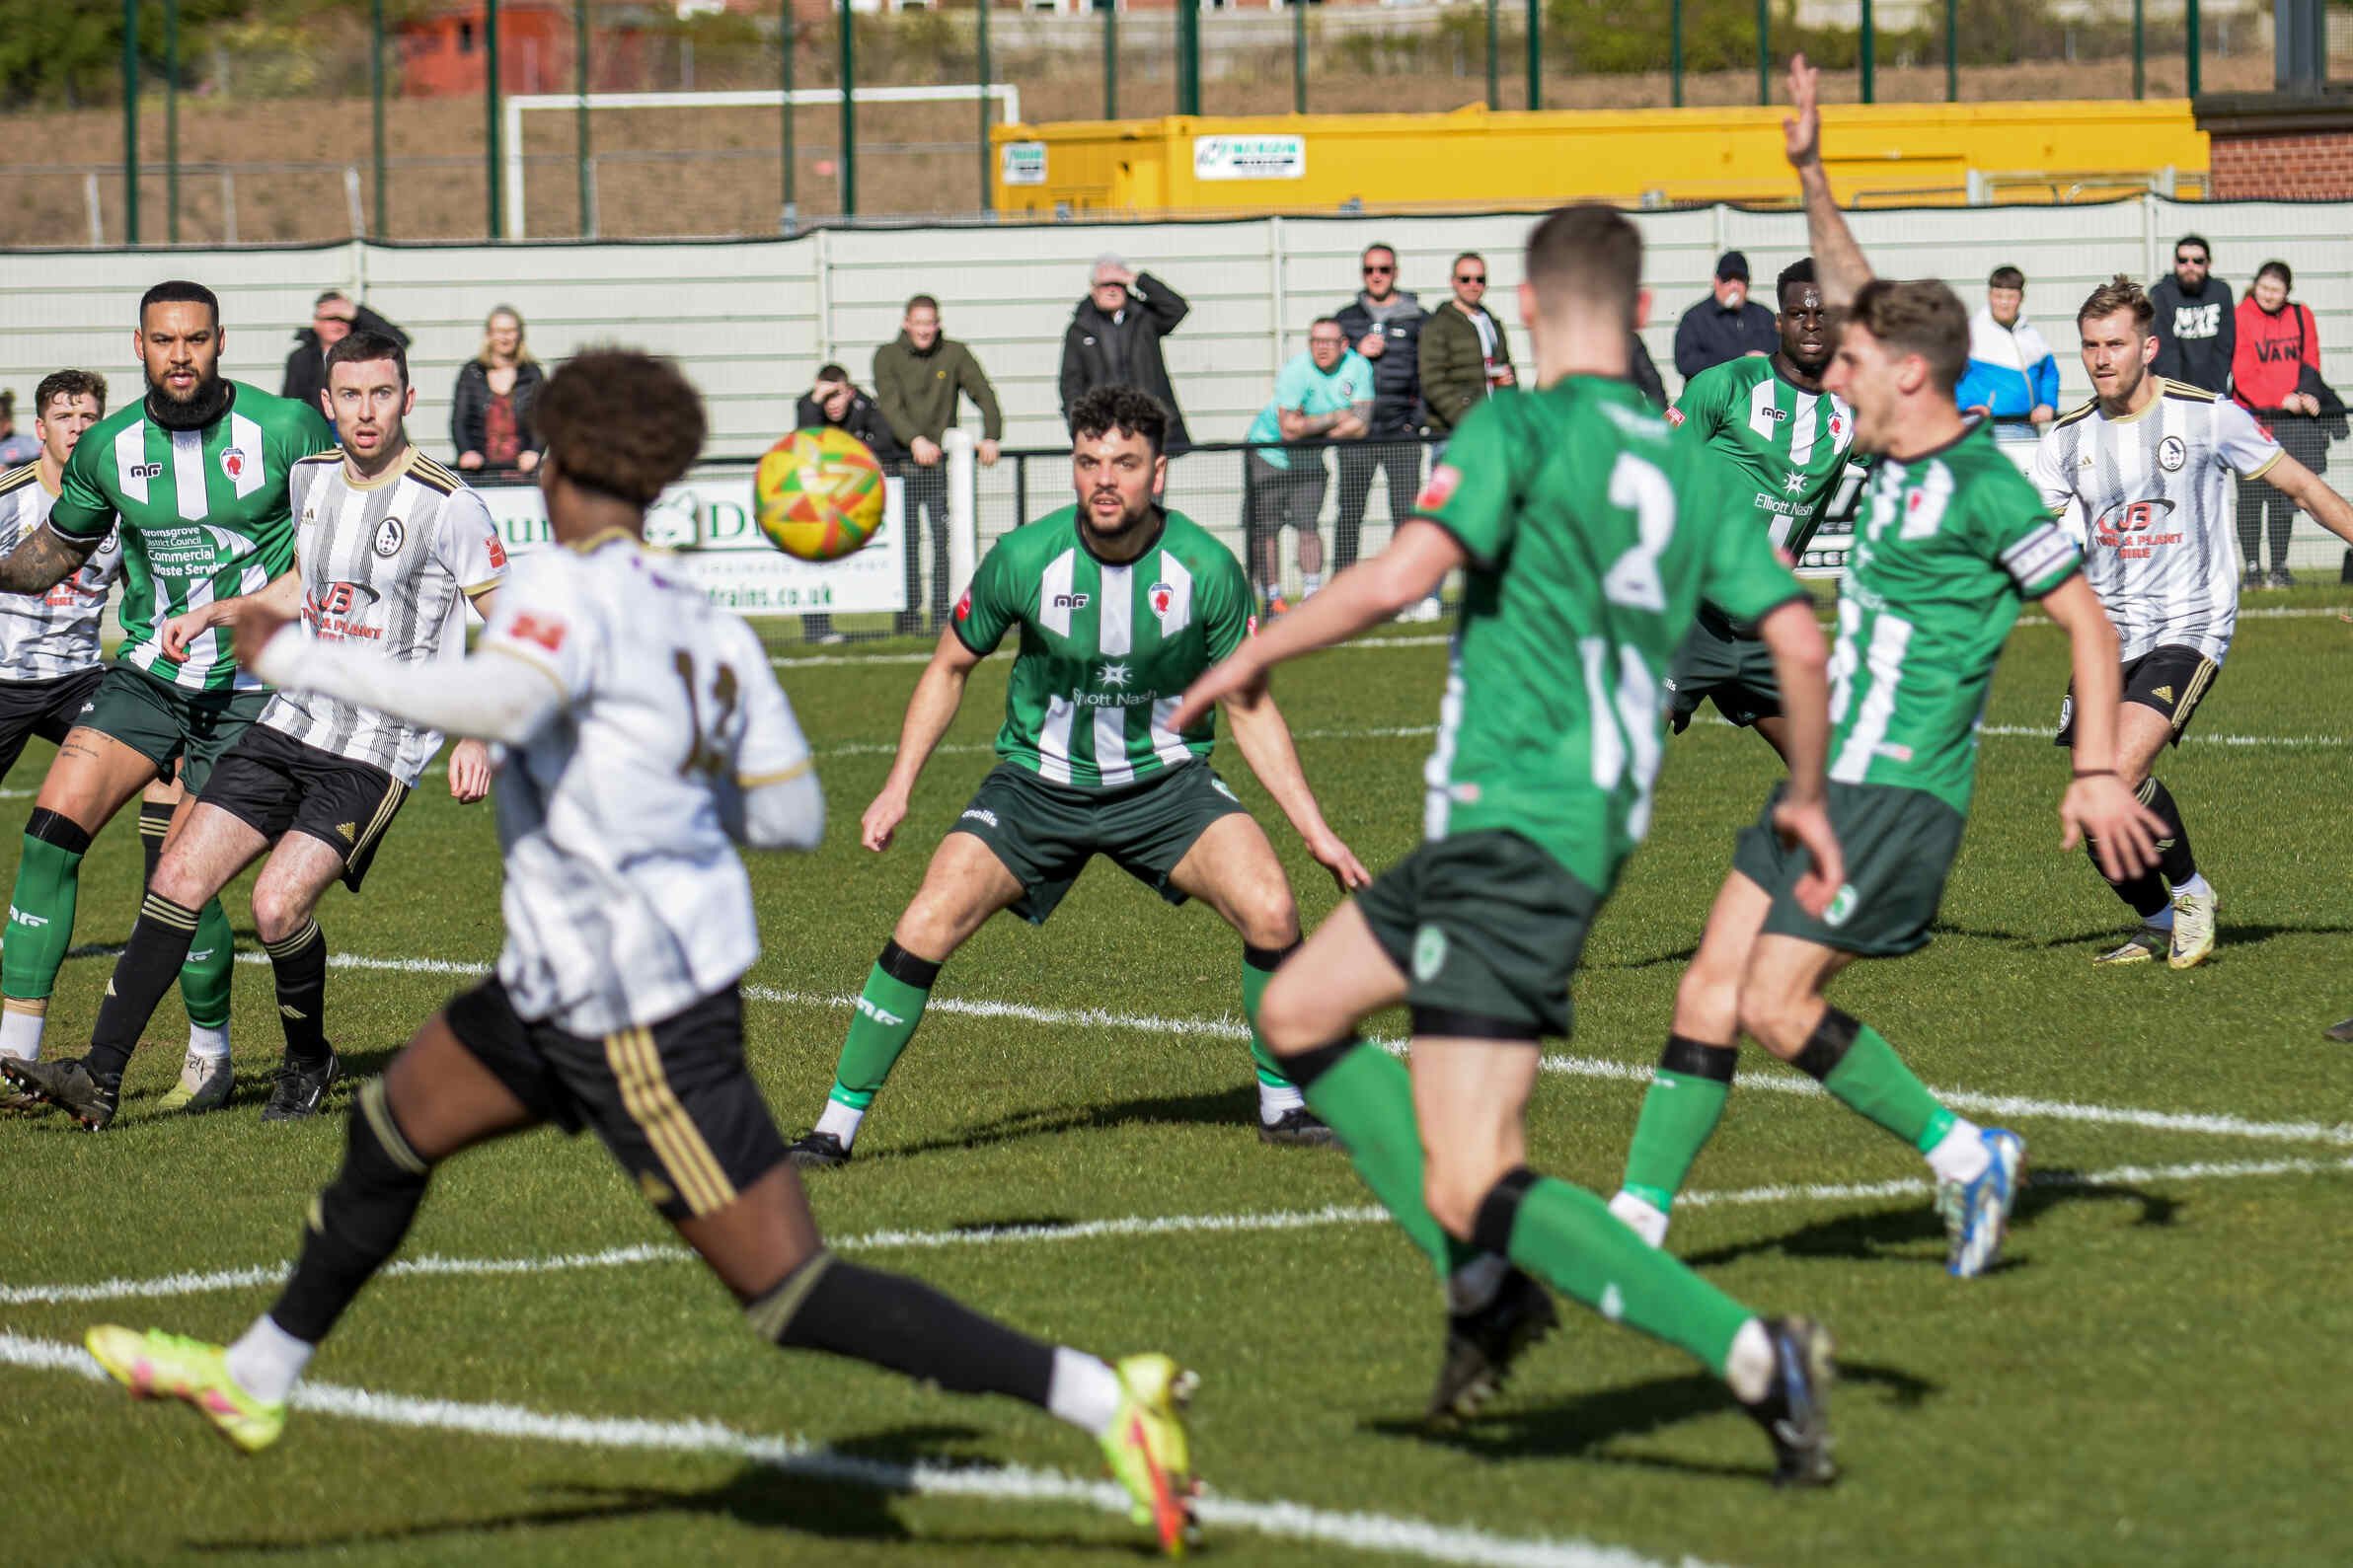 Action from Coalville